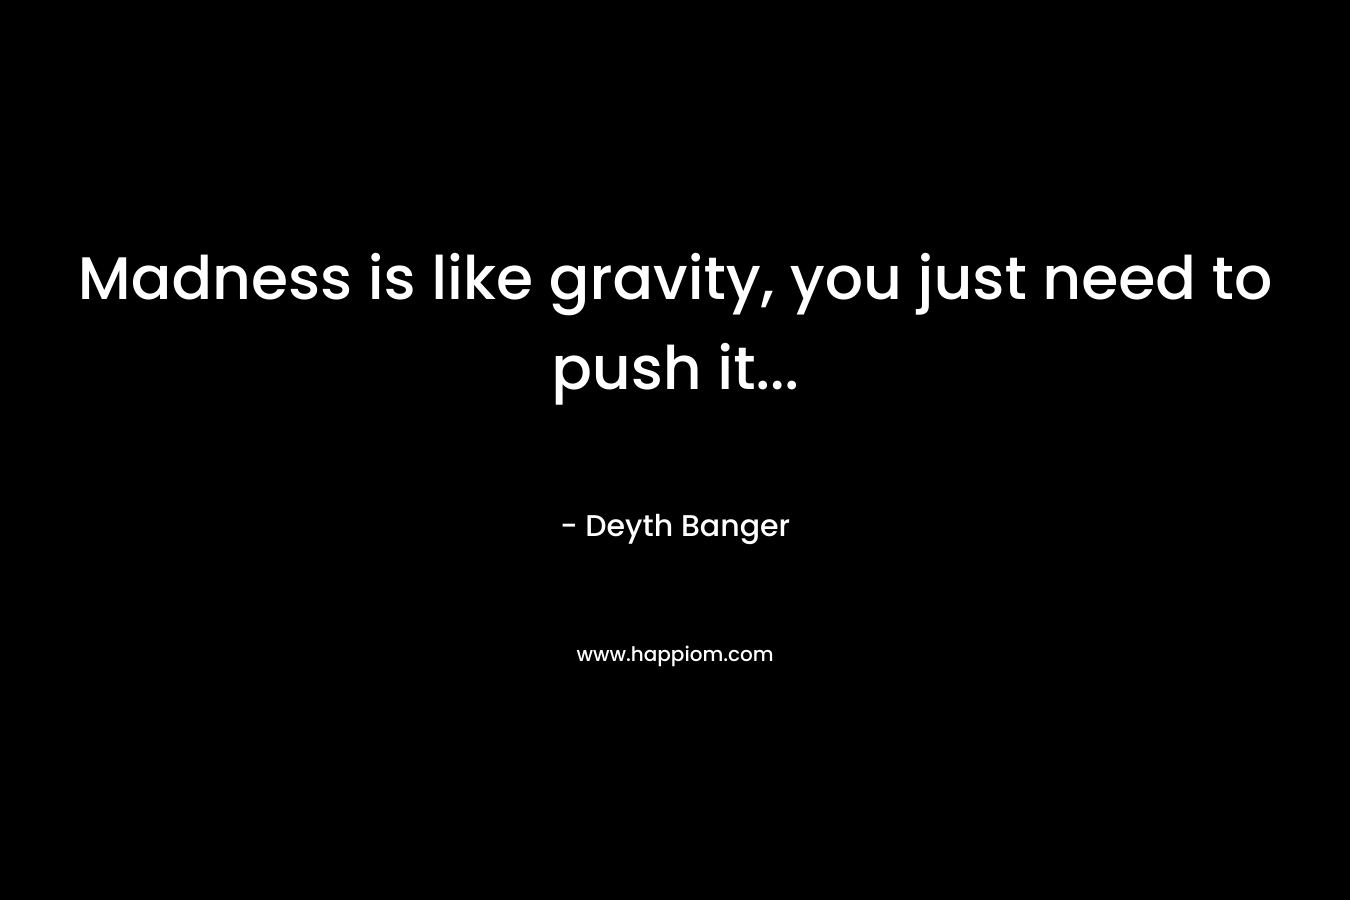 Madness is like gravity, you just need to push it...